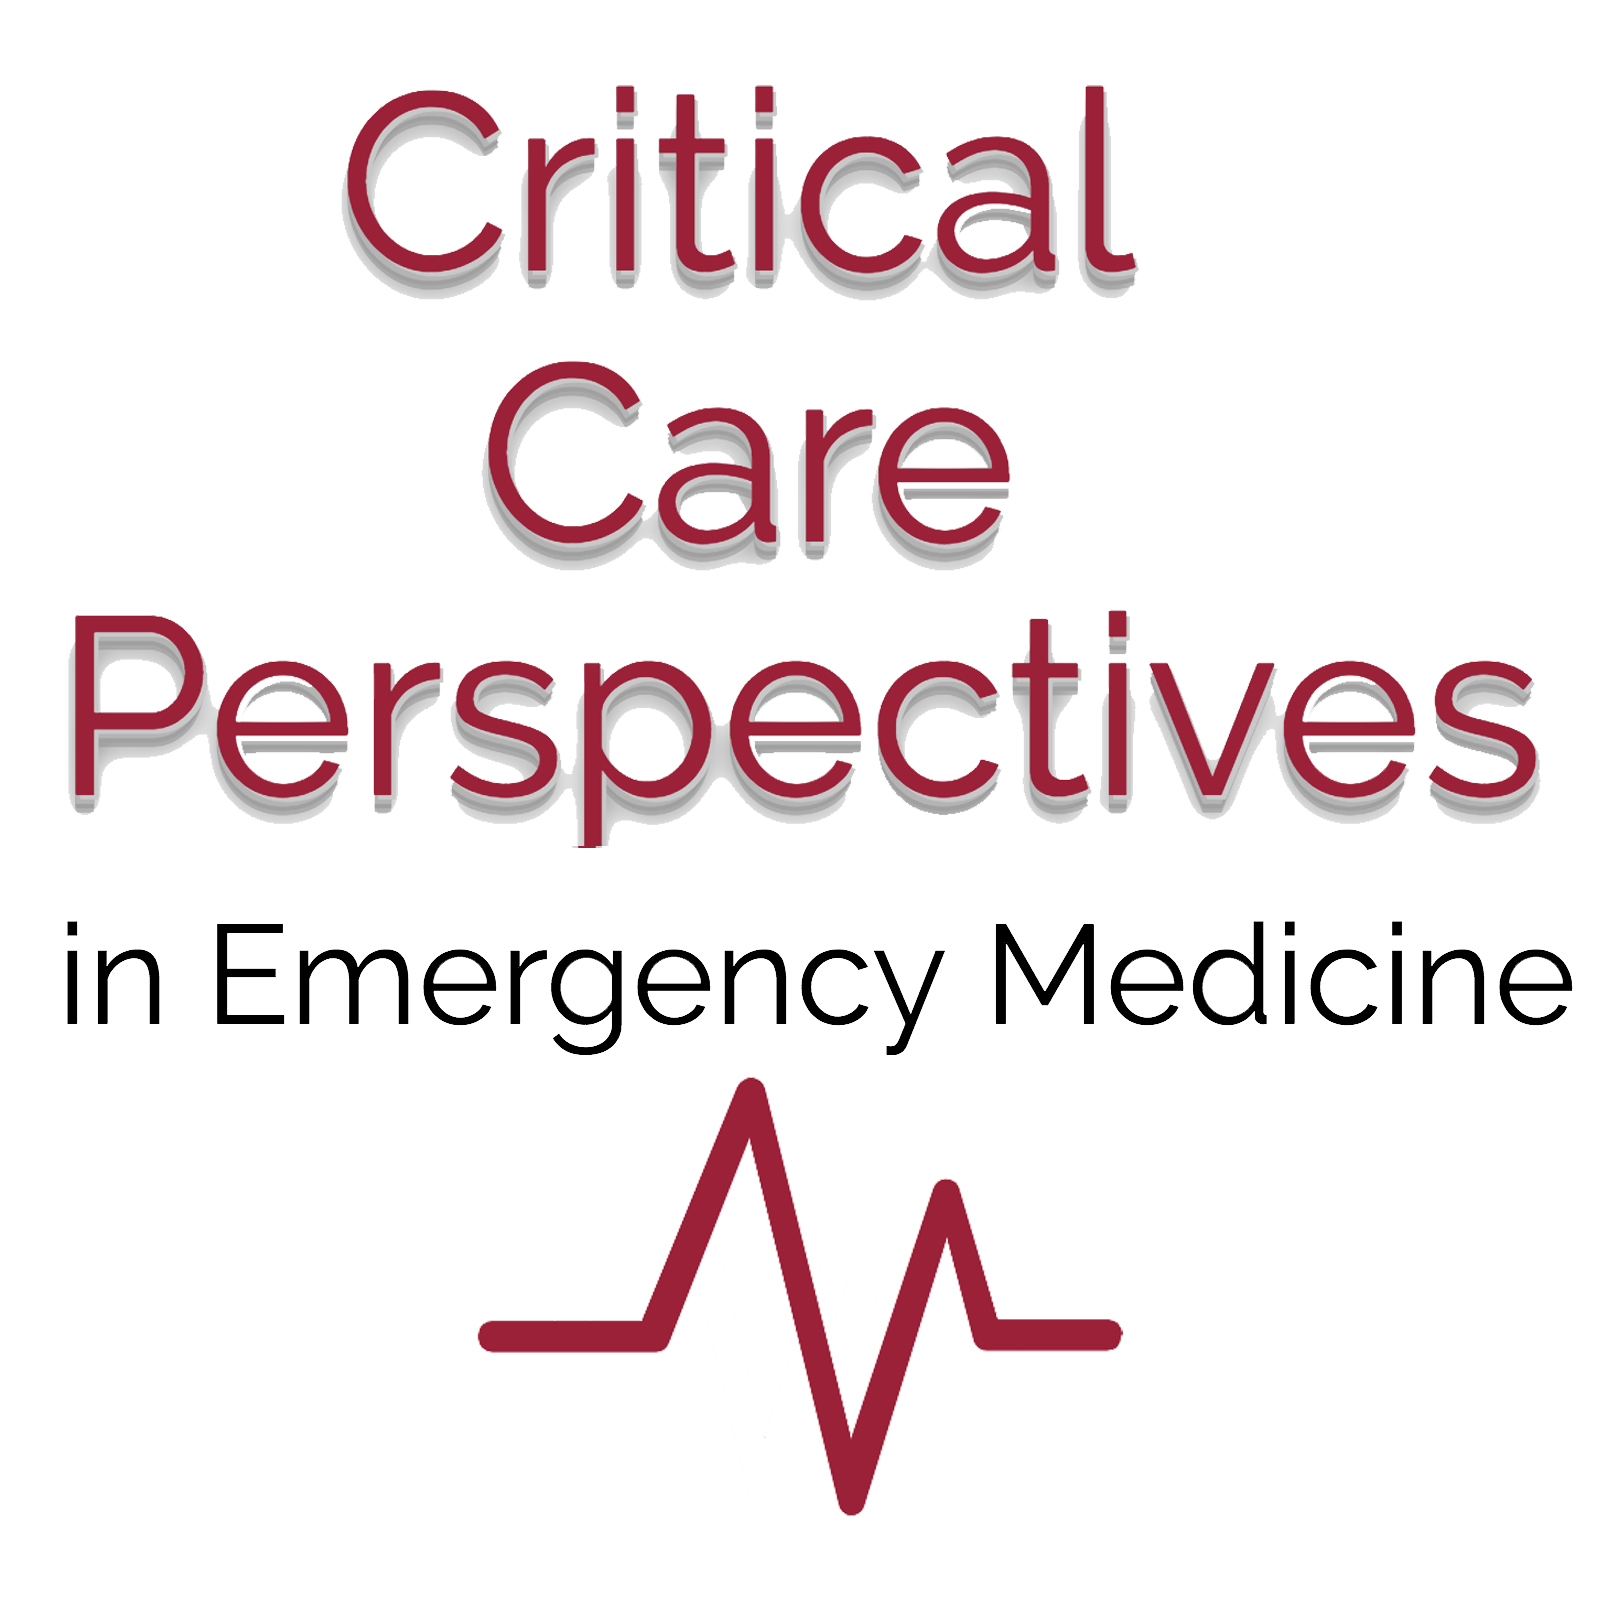 Critical Care Perspectives in Emergency Medicine